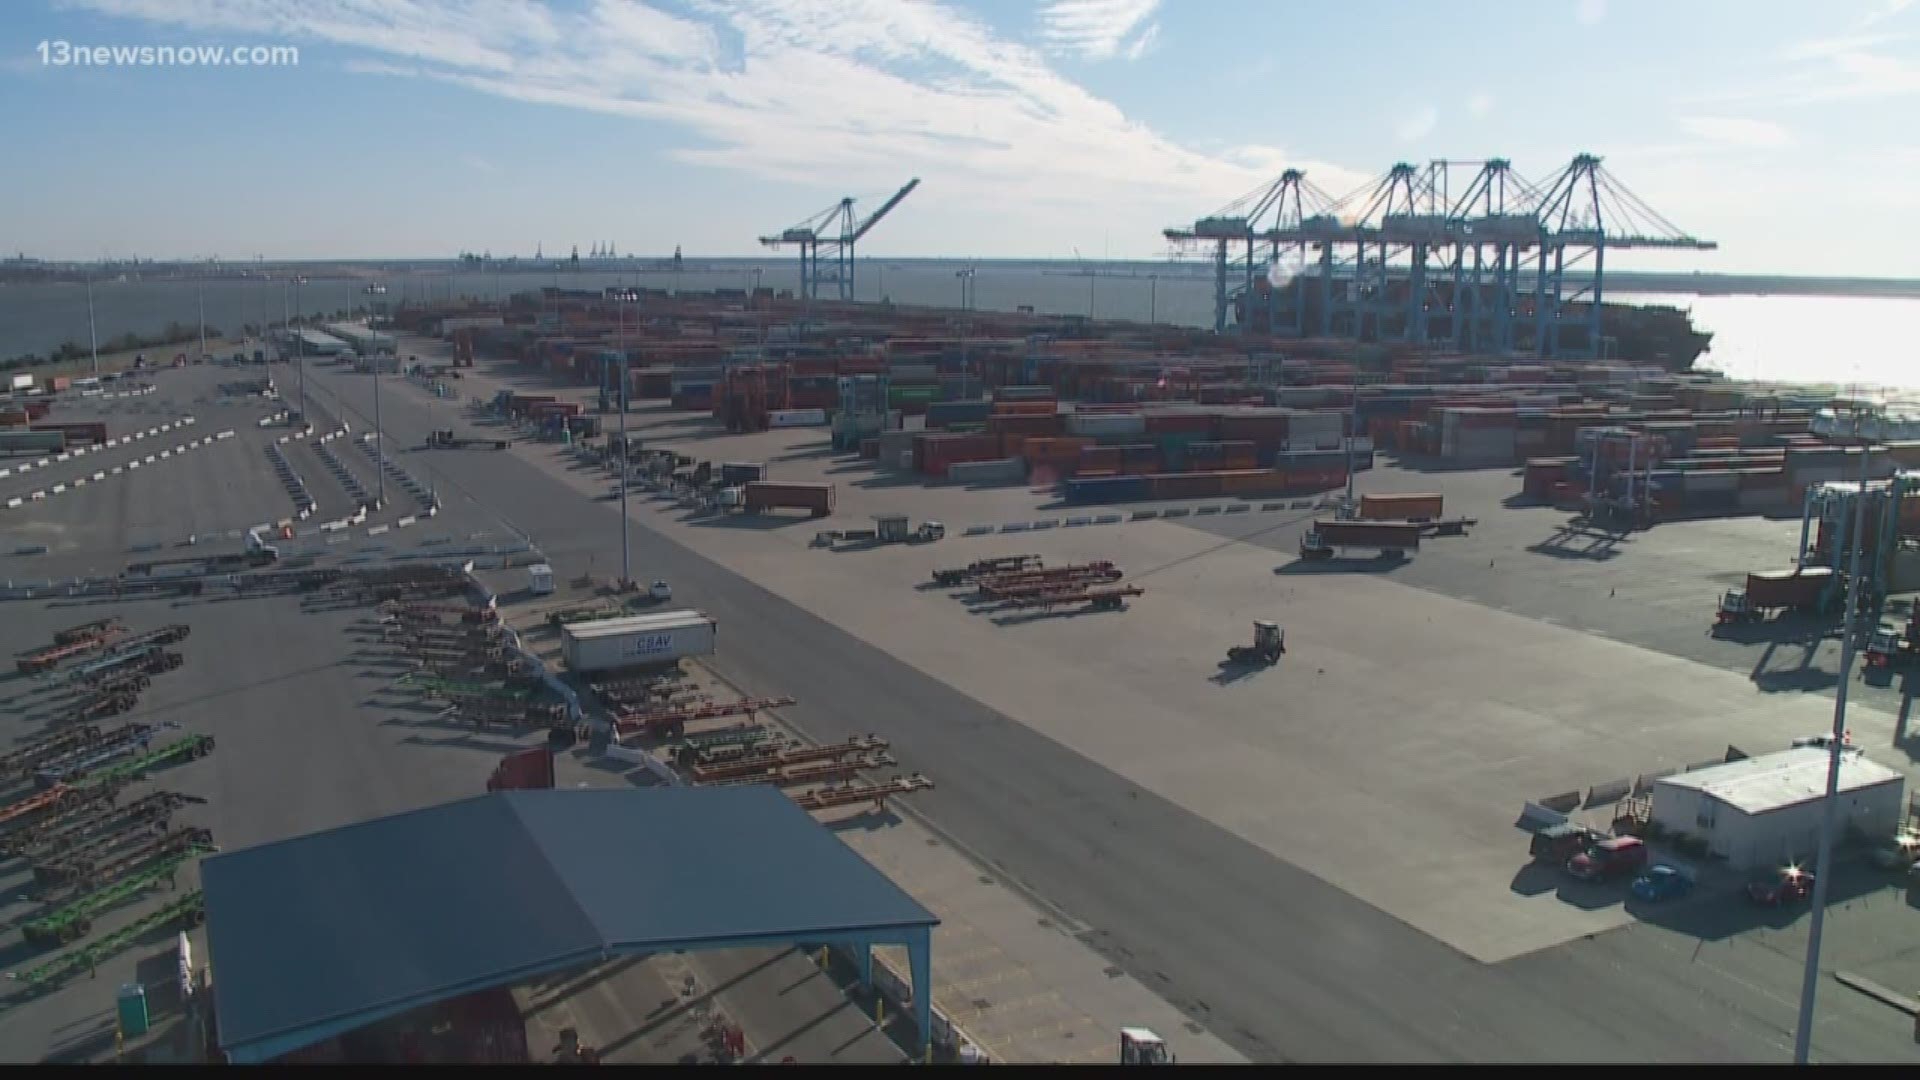 The future is bright for the Port of Virginia!